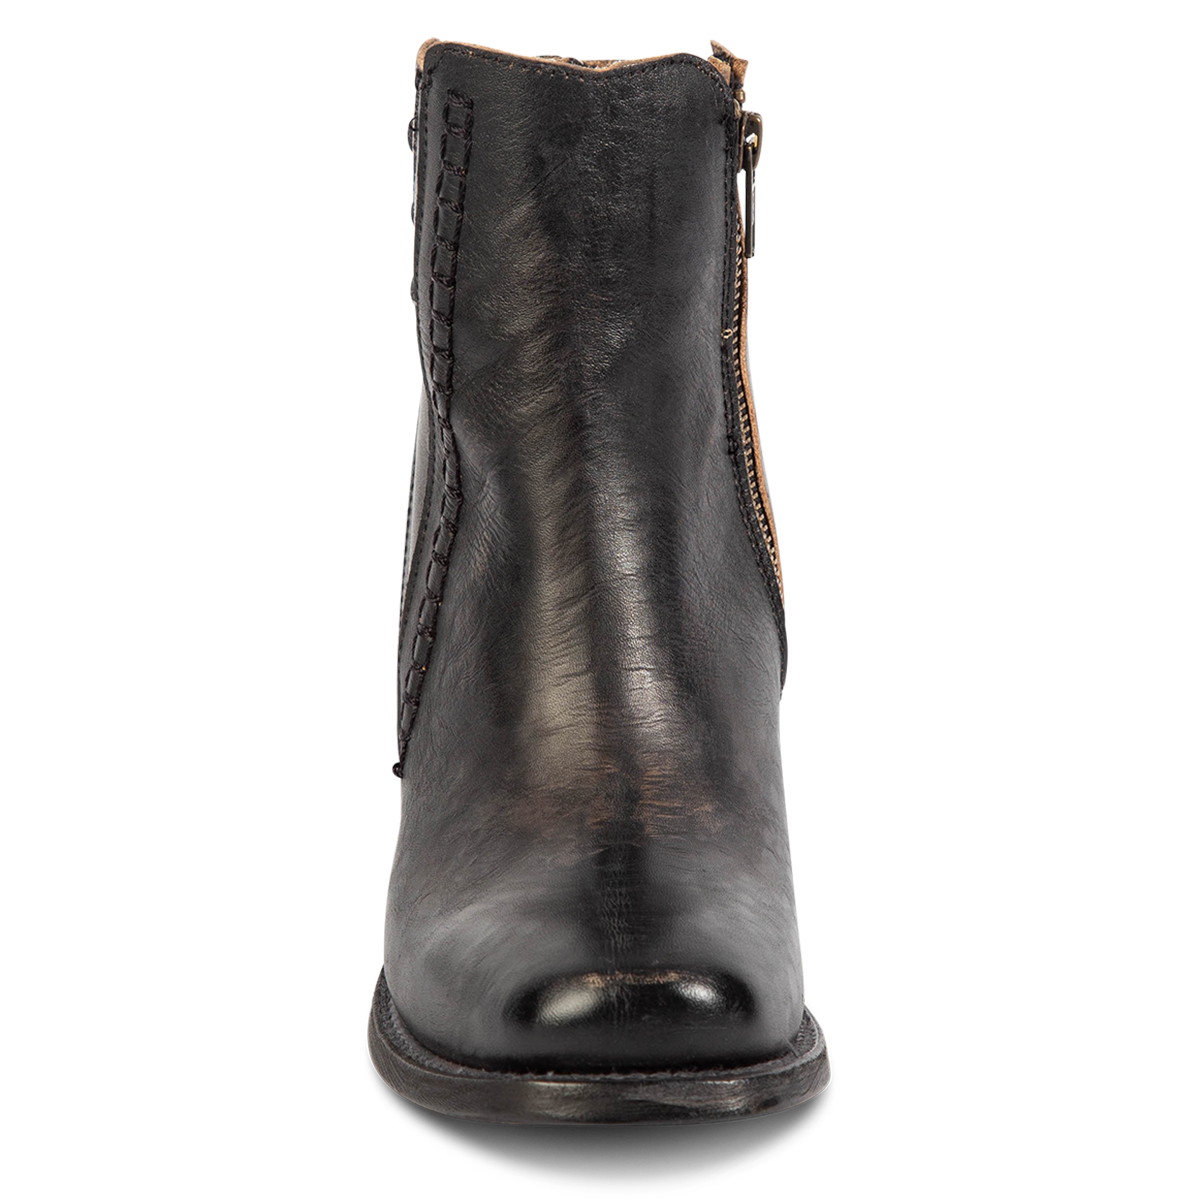 Front view showing FREEBIRD women's Dreamer black leather bootie with a square toe, inside working brass zipper and stitch detailing